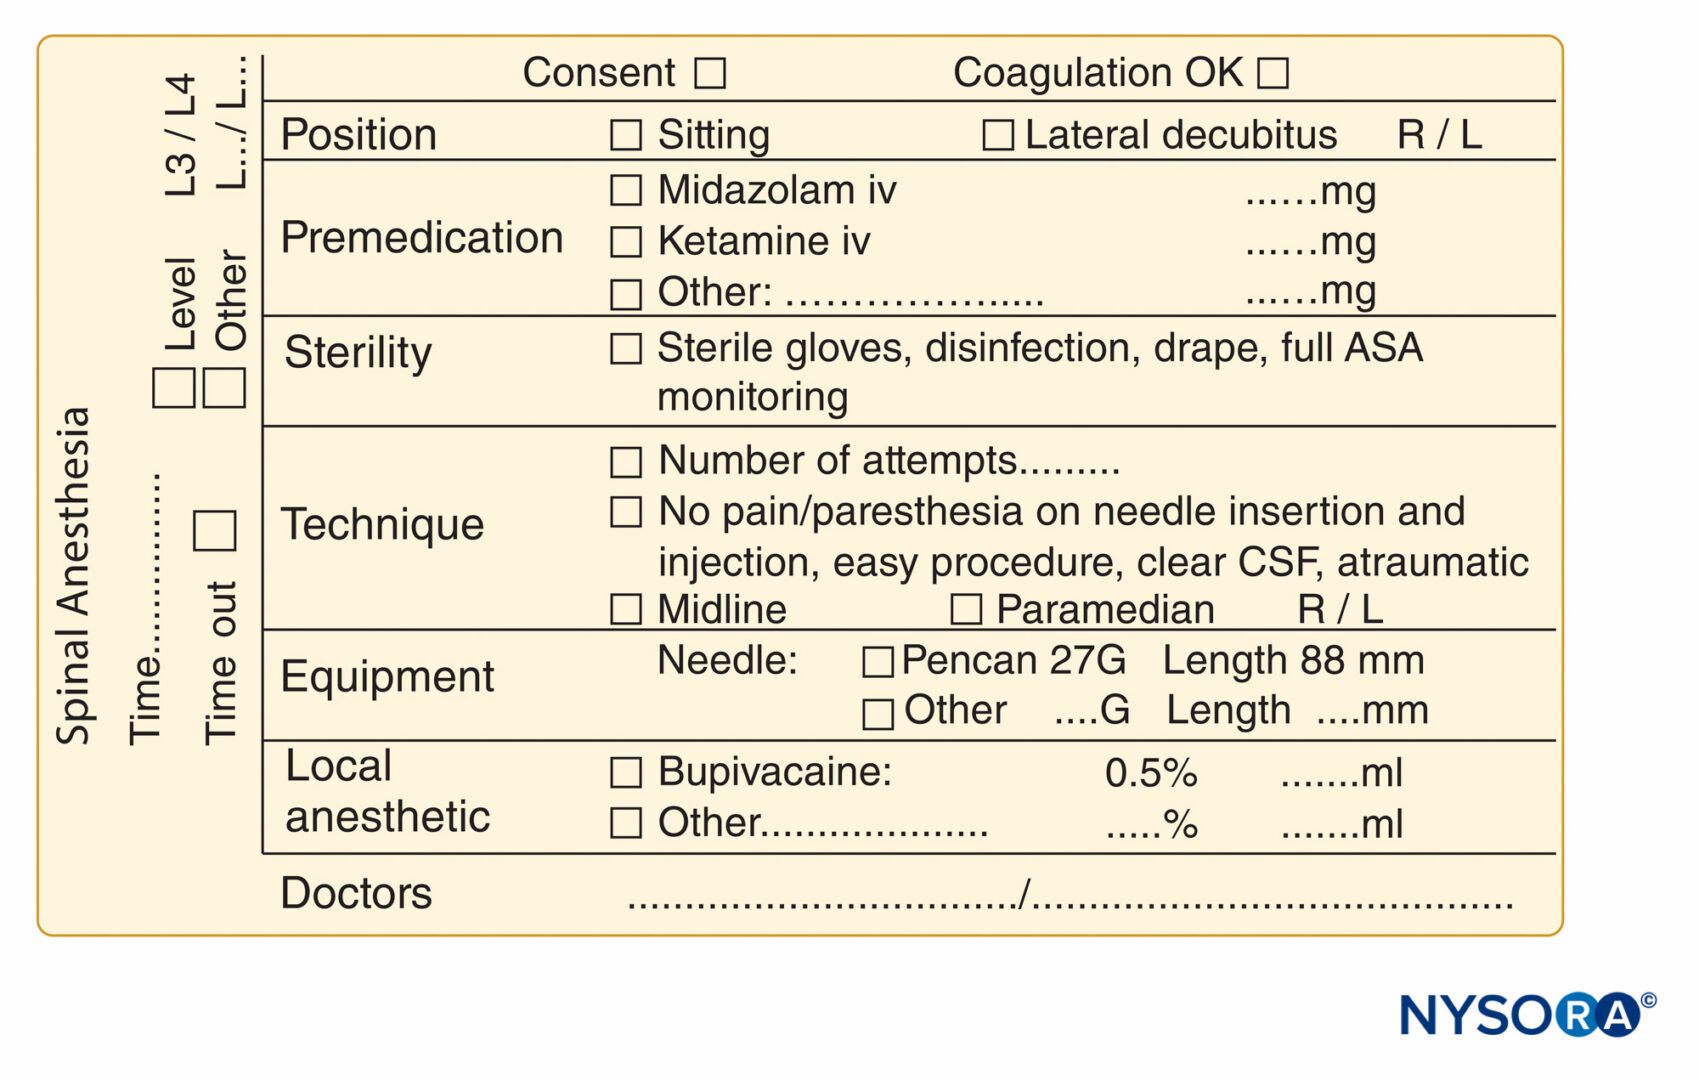 Spinal Anesthesia Level Chart